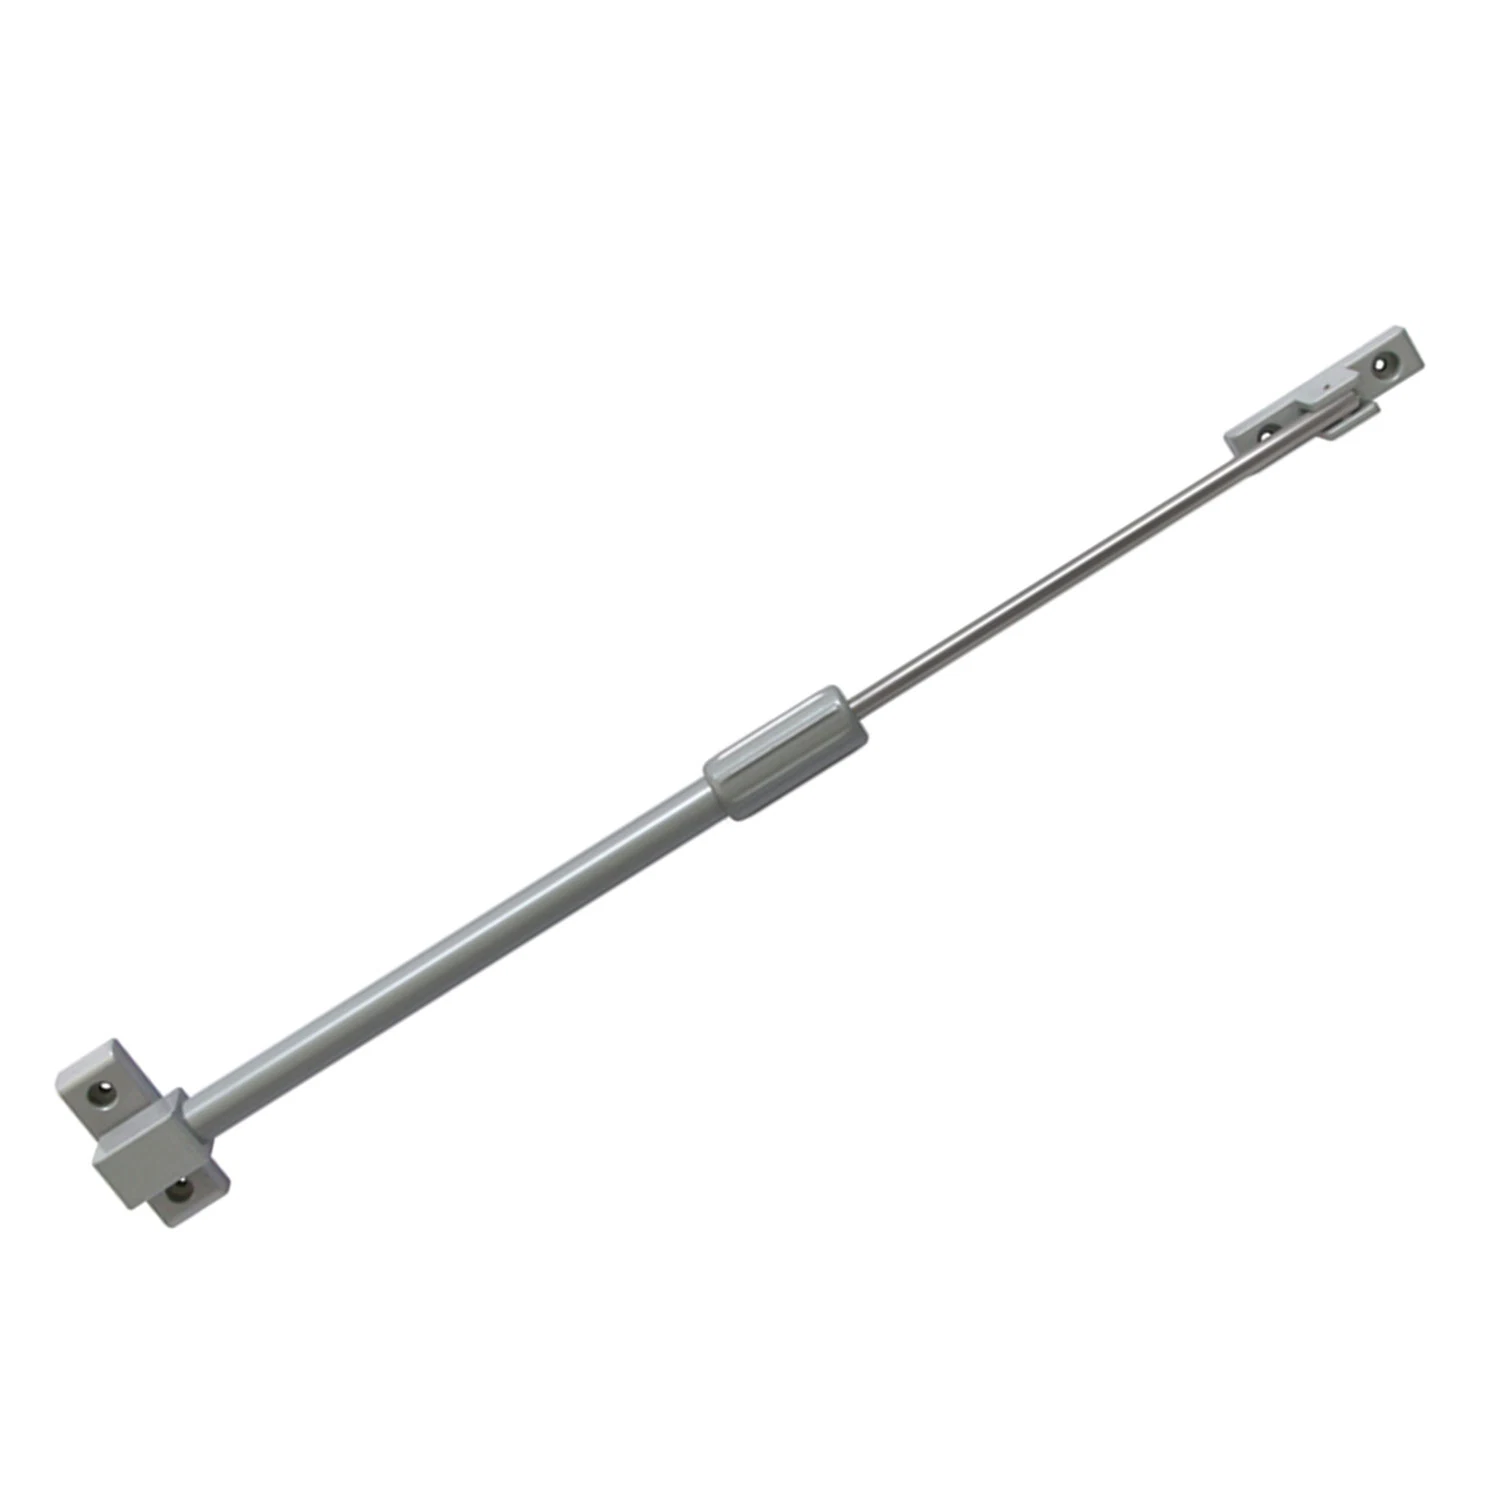 Furniture Hardware Lid Supports Telescopic Friction Stay 50cm Length